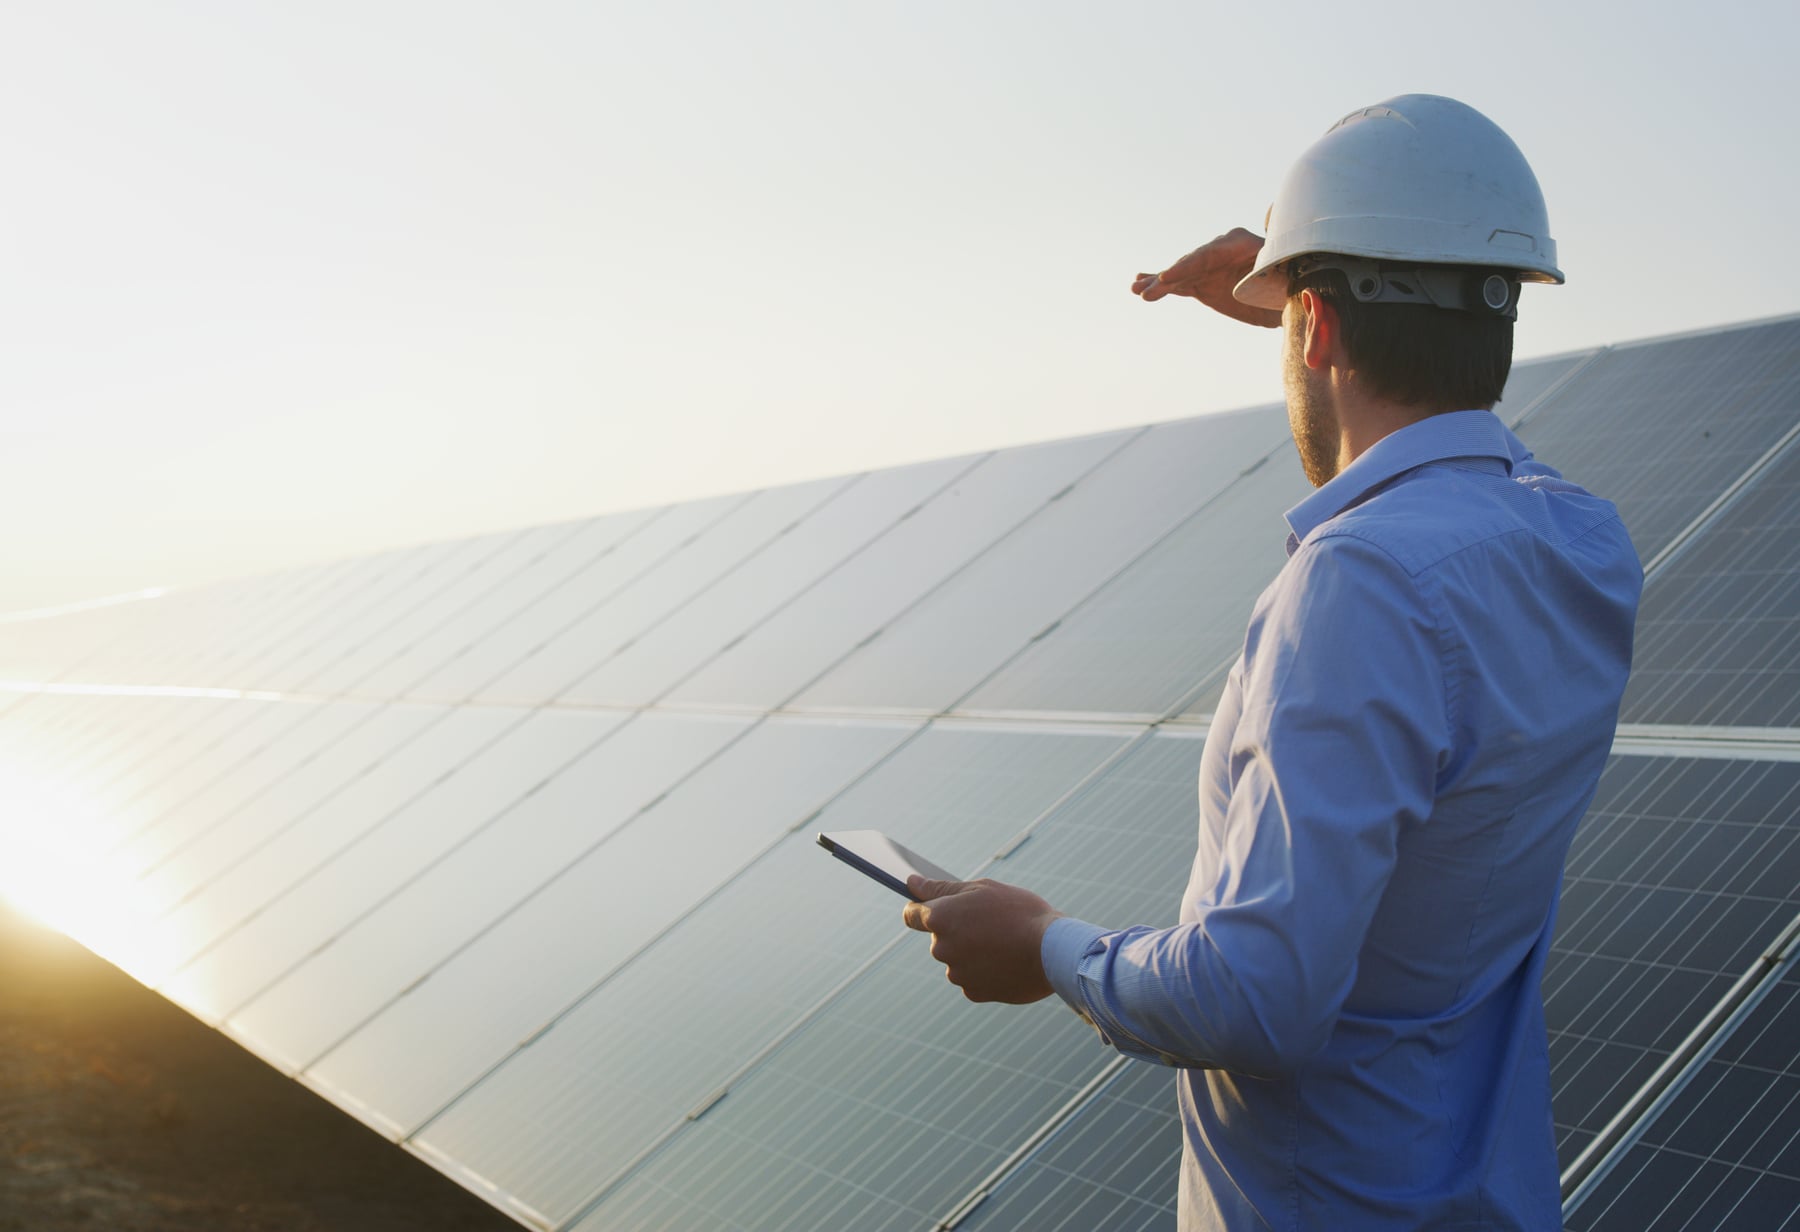 How Long Does it Take to Install a Commercial Solar PV System?